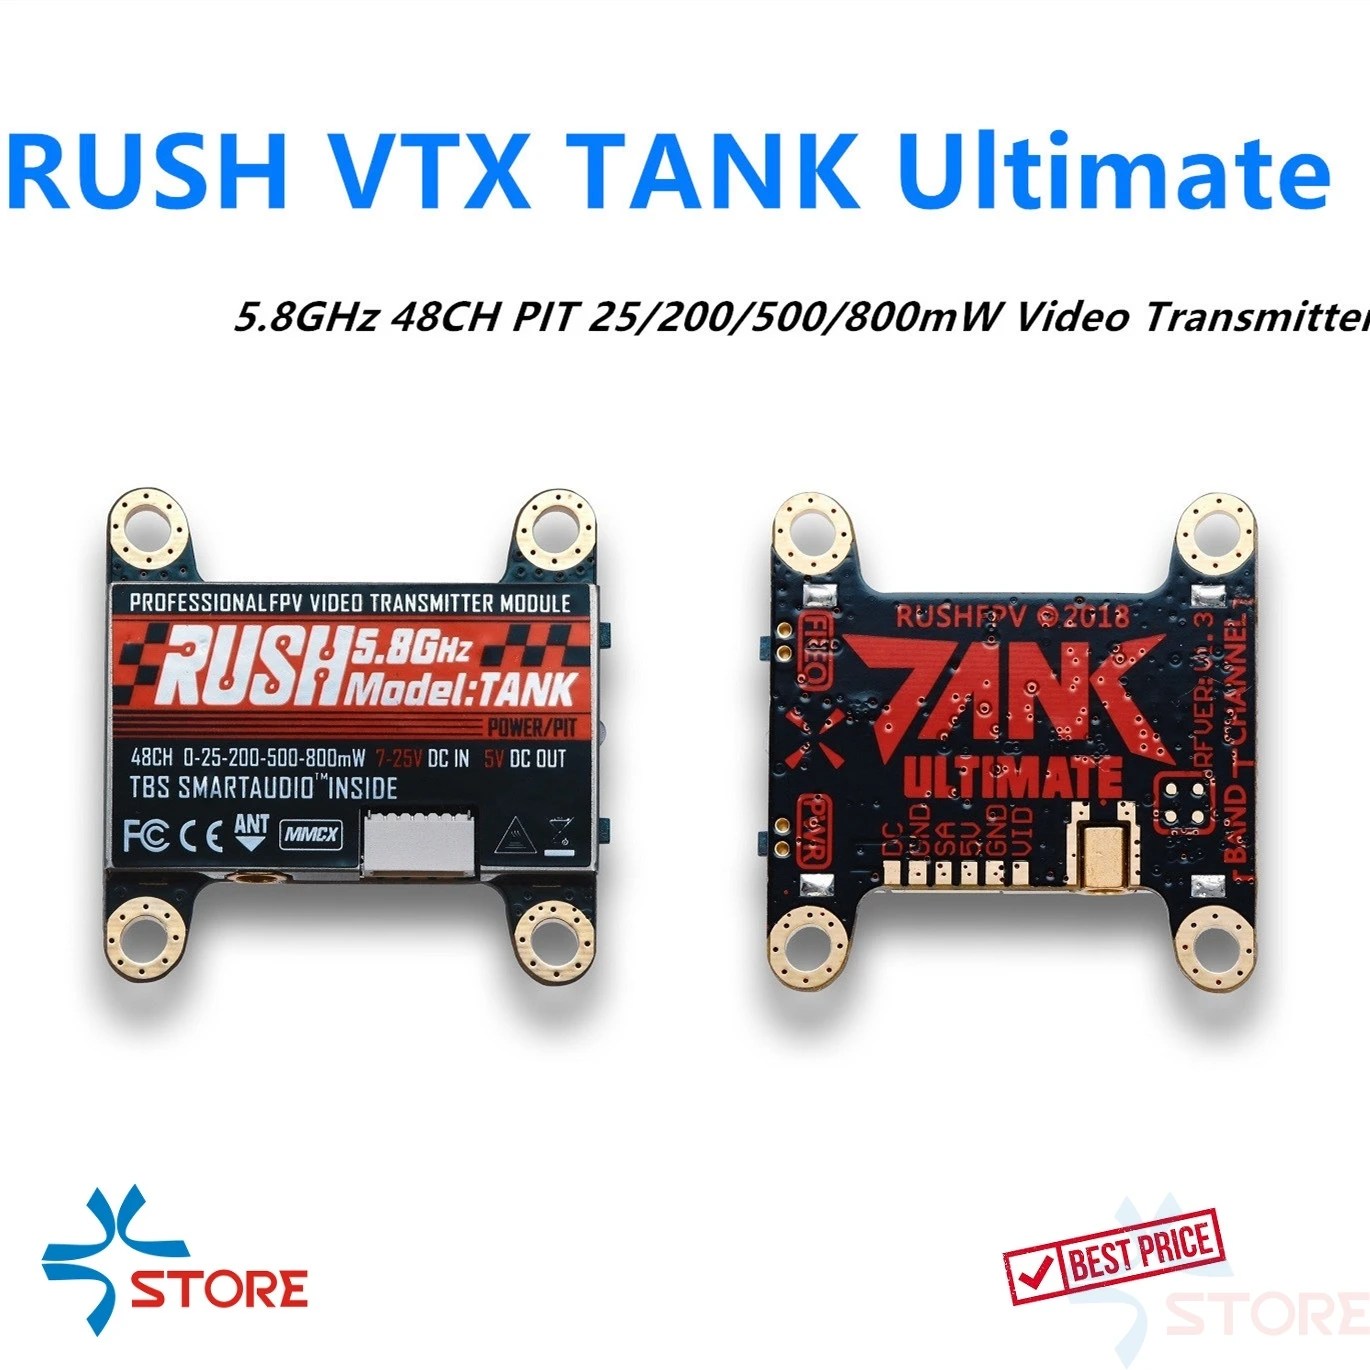 RUSH VTX TANK ultimate 5.8GHz 48CH PIT 25/200/500/800mW Video Transmitter Bulid-in TBS Smartvideo For FPV Racing Drone 1